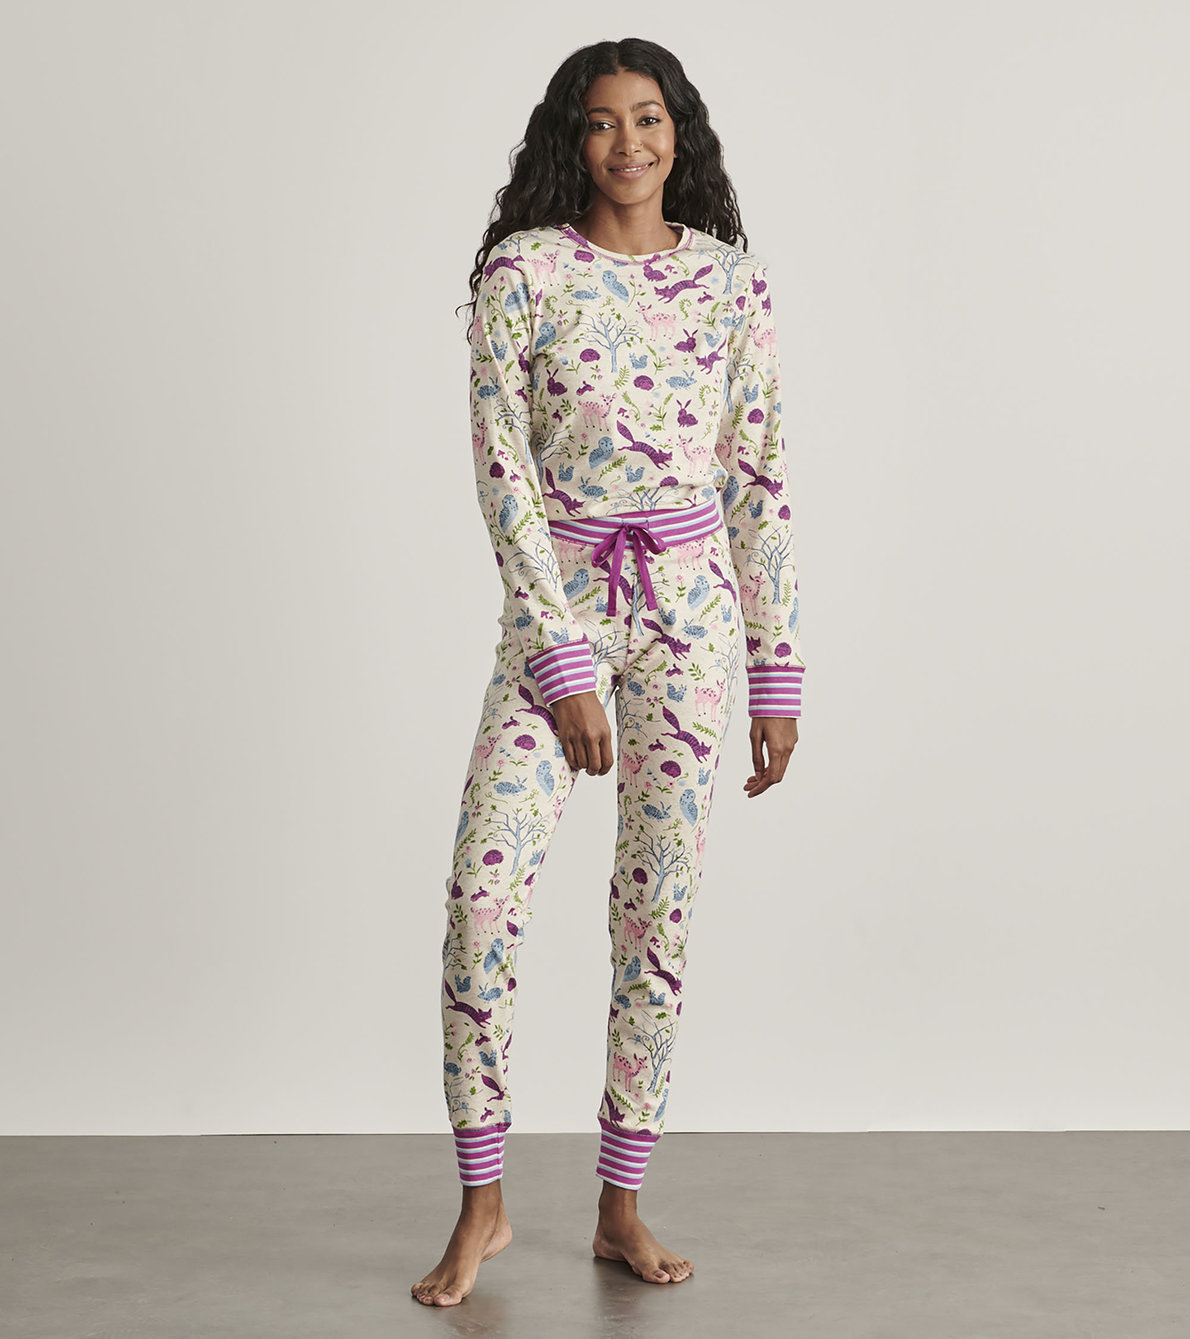 View larger image of Magical Forest Women's Organic Cotton Pajama Set